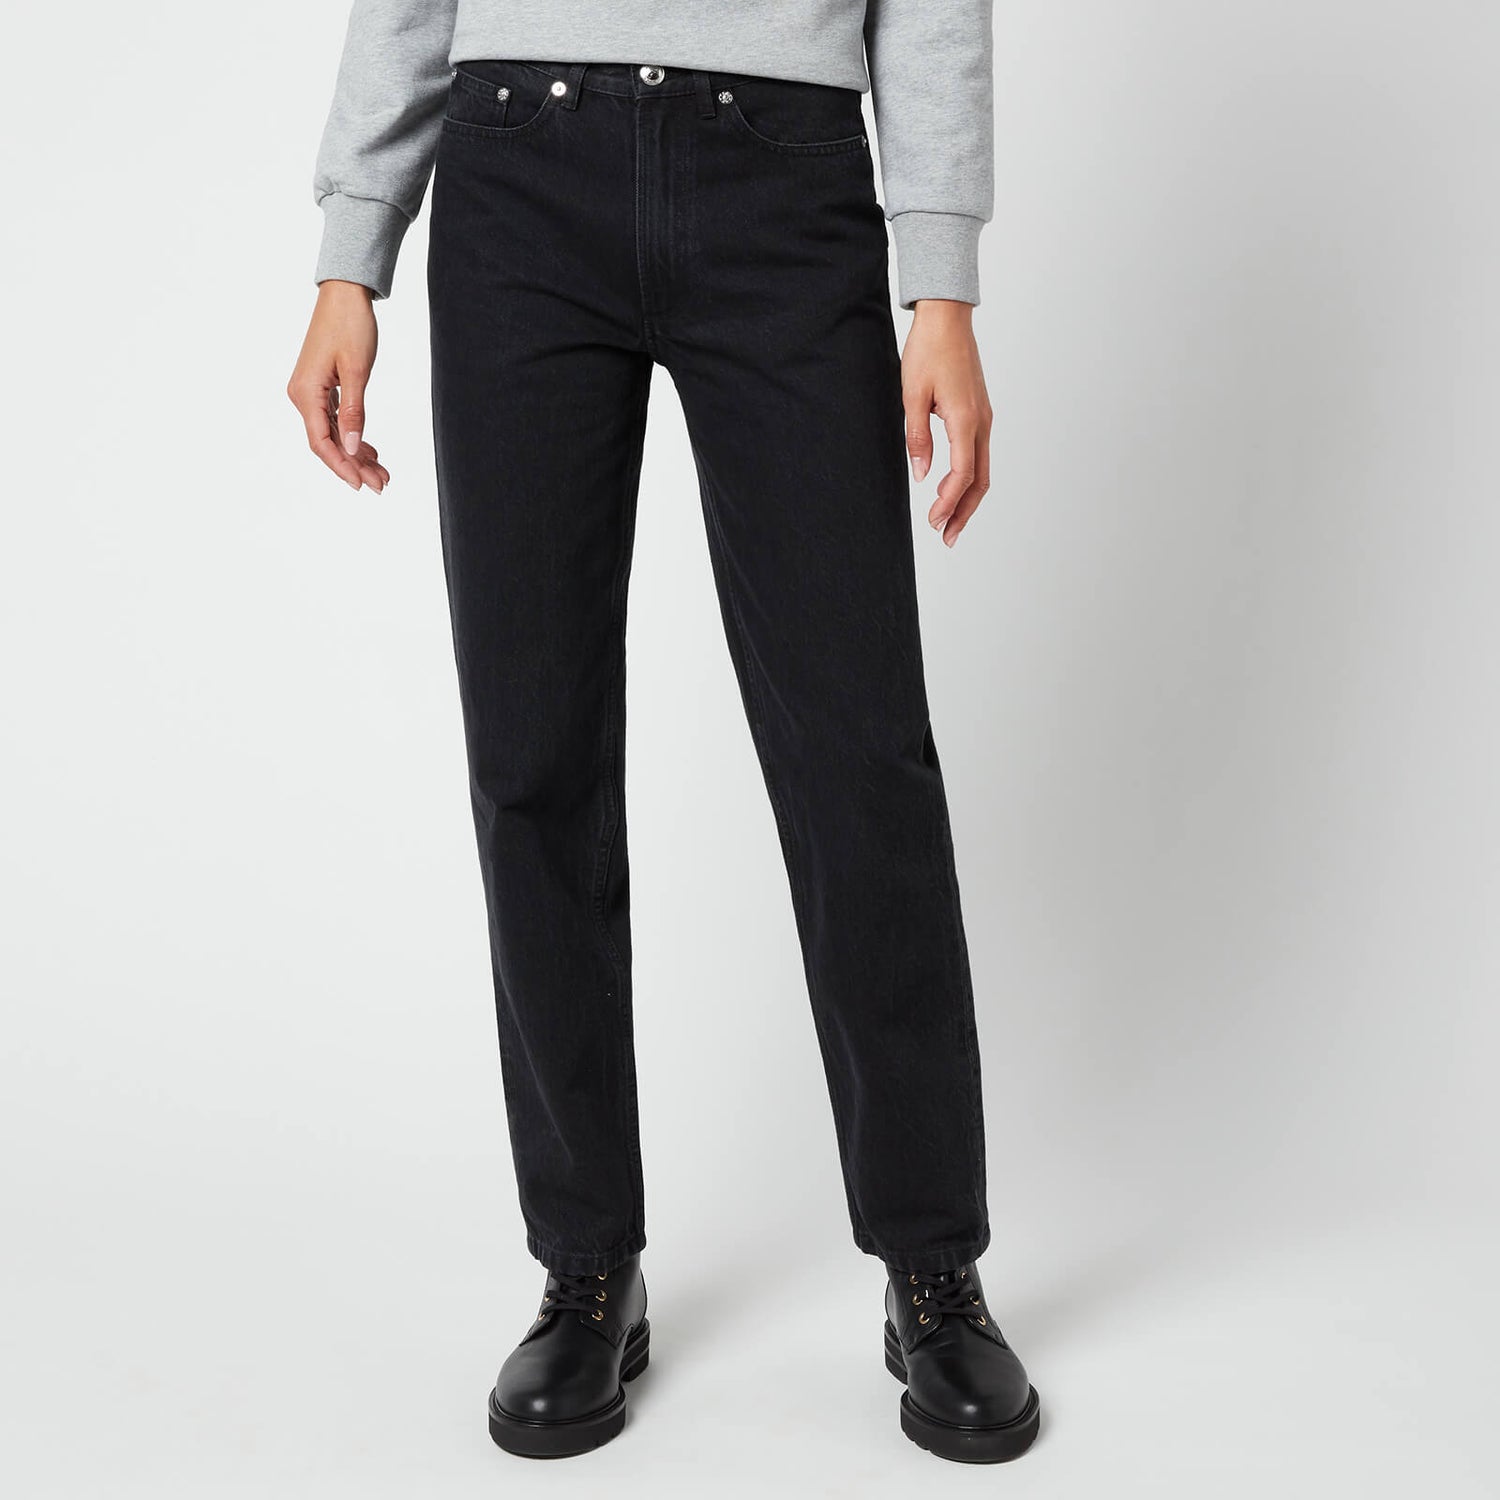 A.P.C. Women's Martin Jeans - Black - Free UK Delivery Available